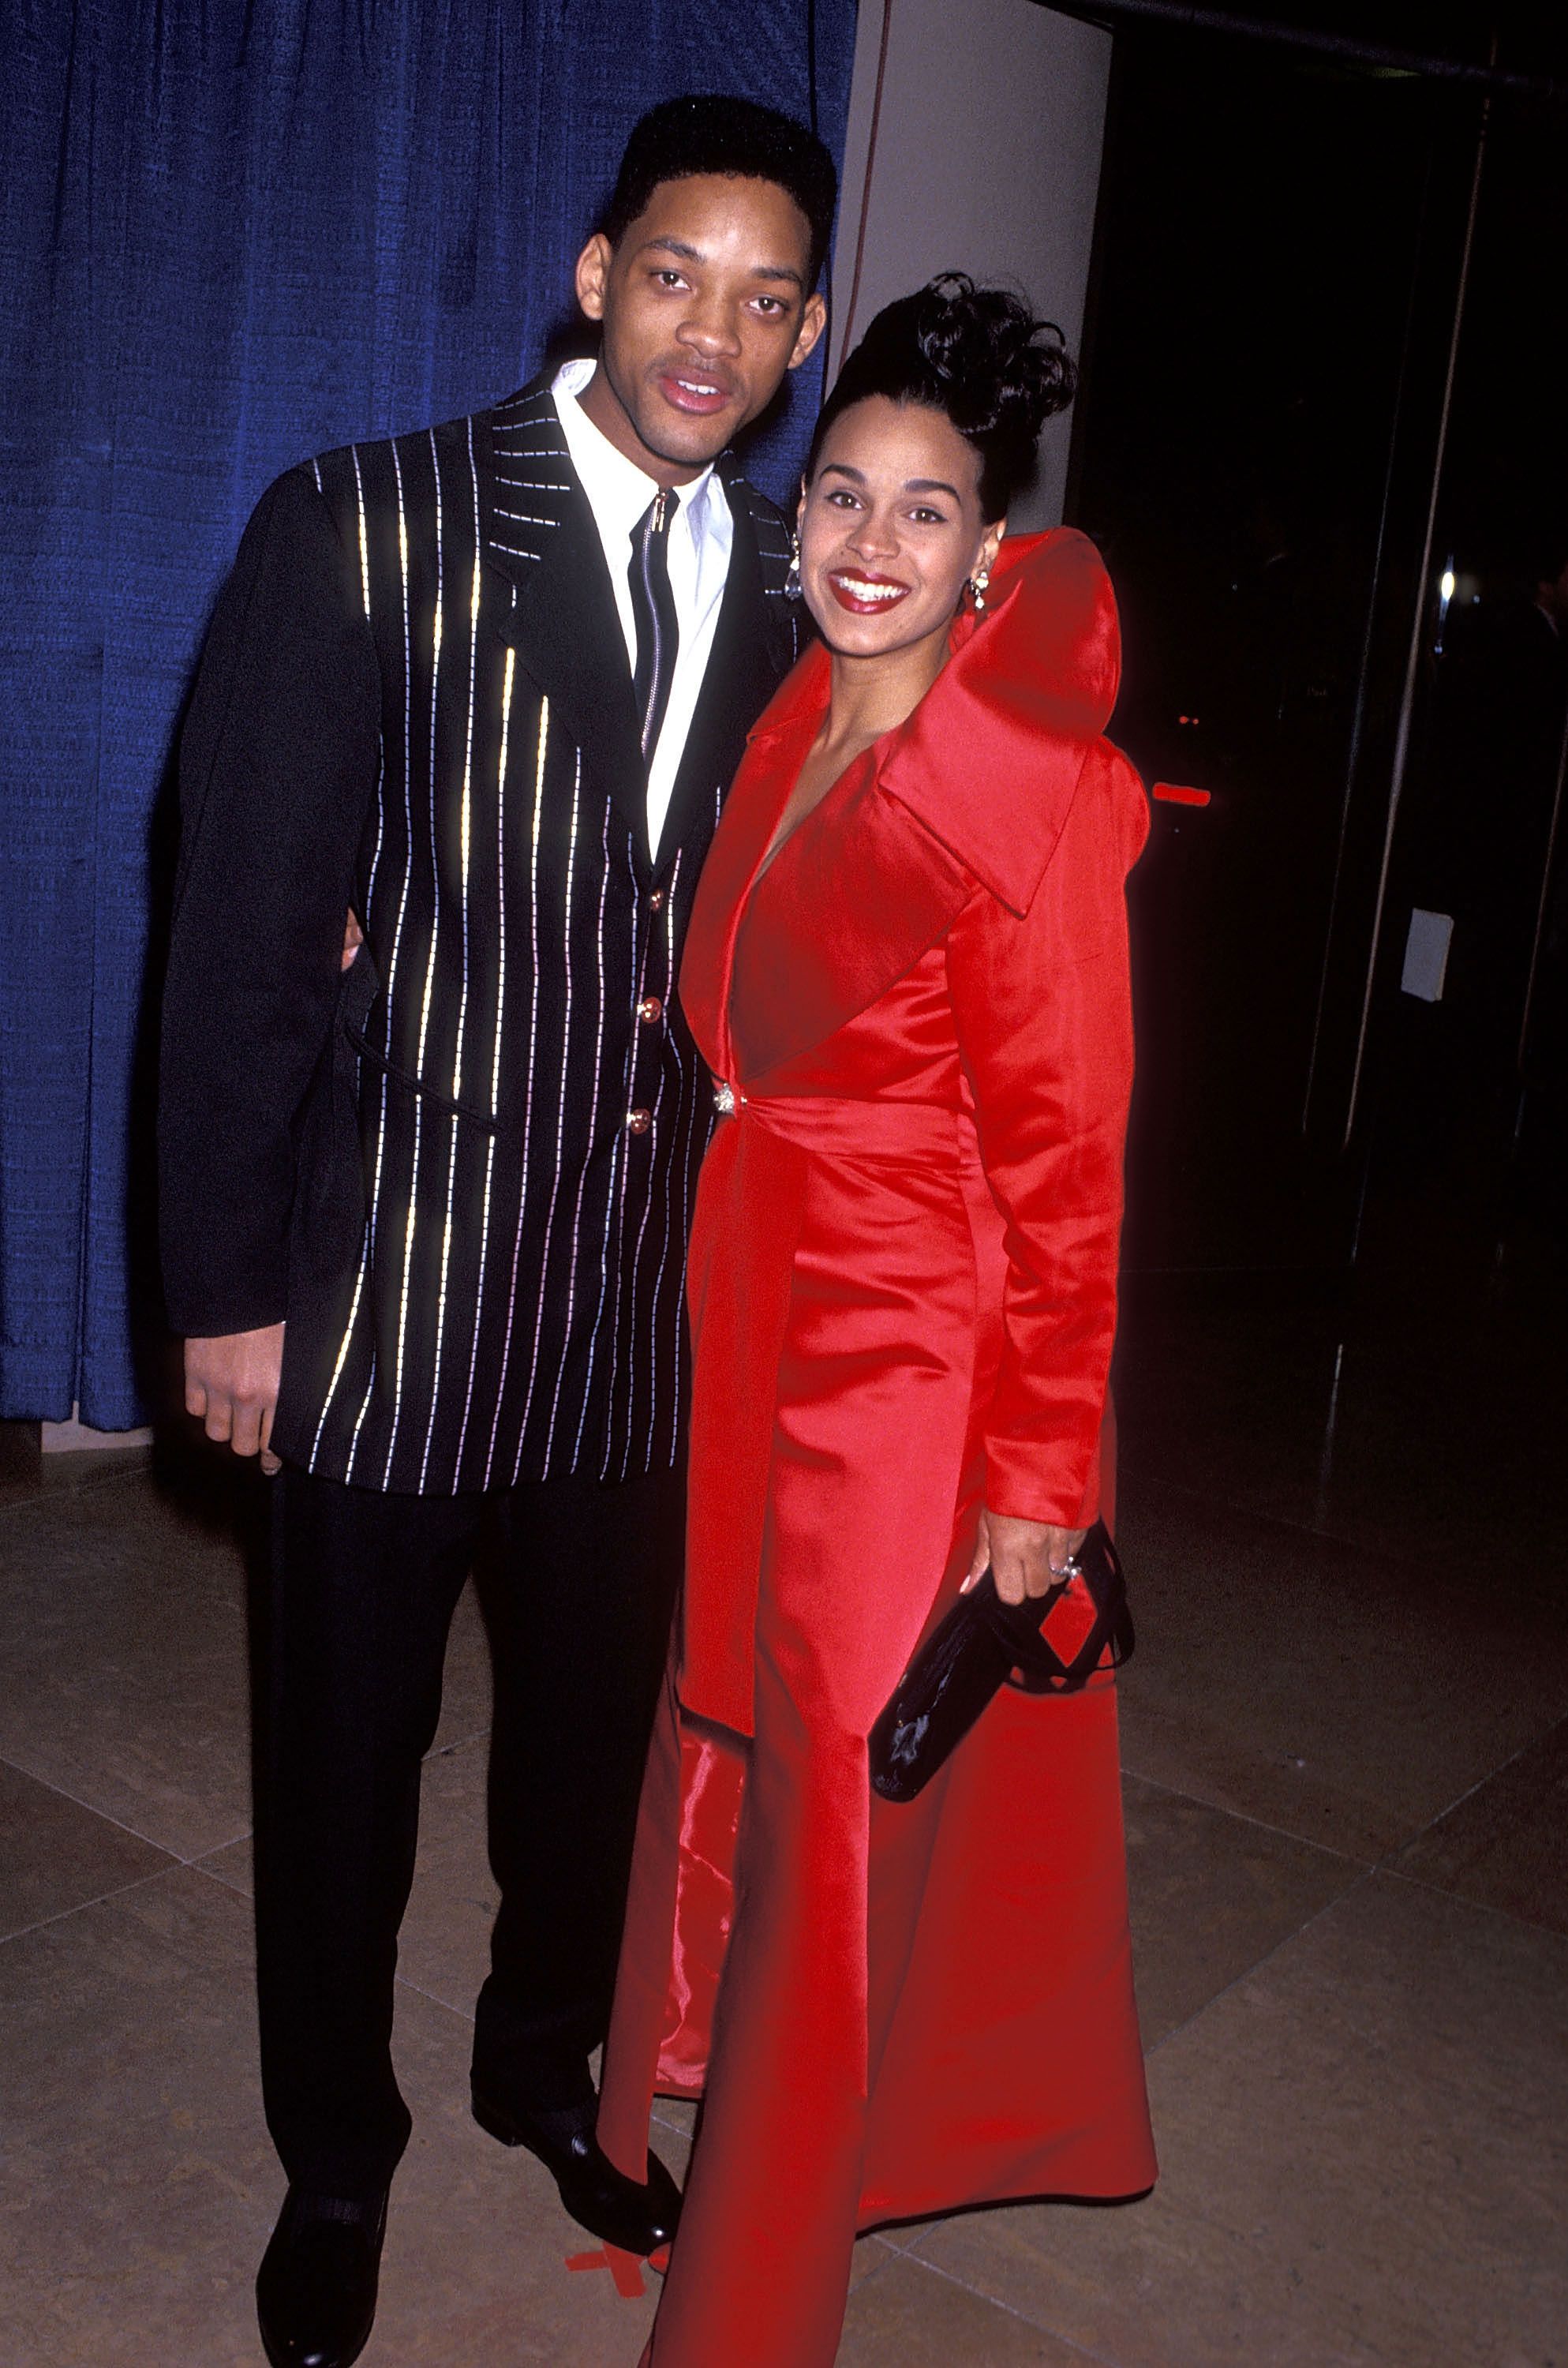 Will Smith and wife Sheree Zampino attend the 50th Annual Golden Globe Awards on January 23, 1993 at Beverly Hilton Hotel in Beverly Hills, California. | Source: Getty Images